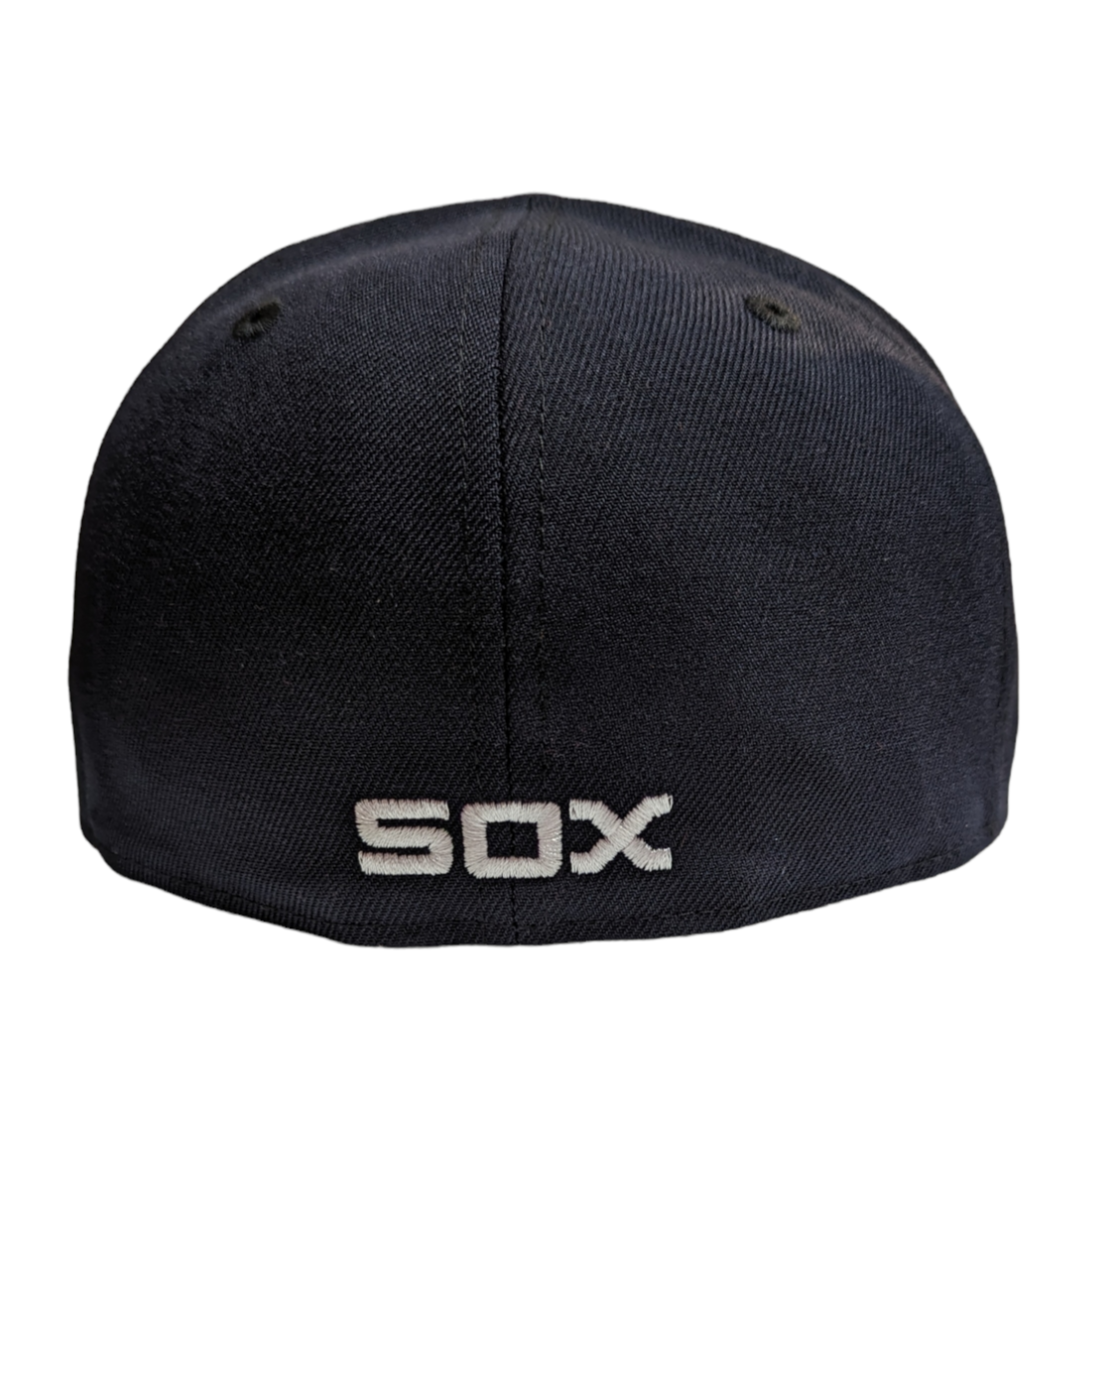 Chicago White Sox New Era Batterman Logo Navy Cooperstown Batterman 59FIFTY Fitted Hat